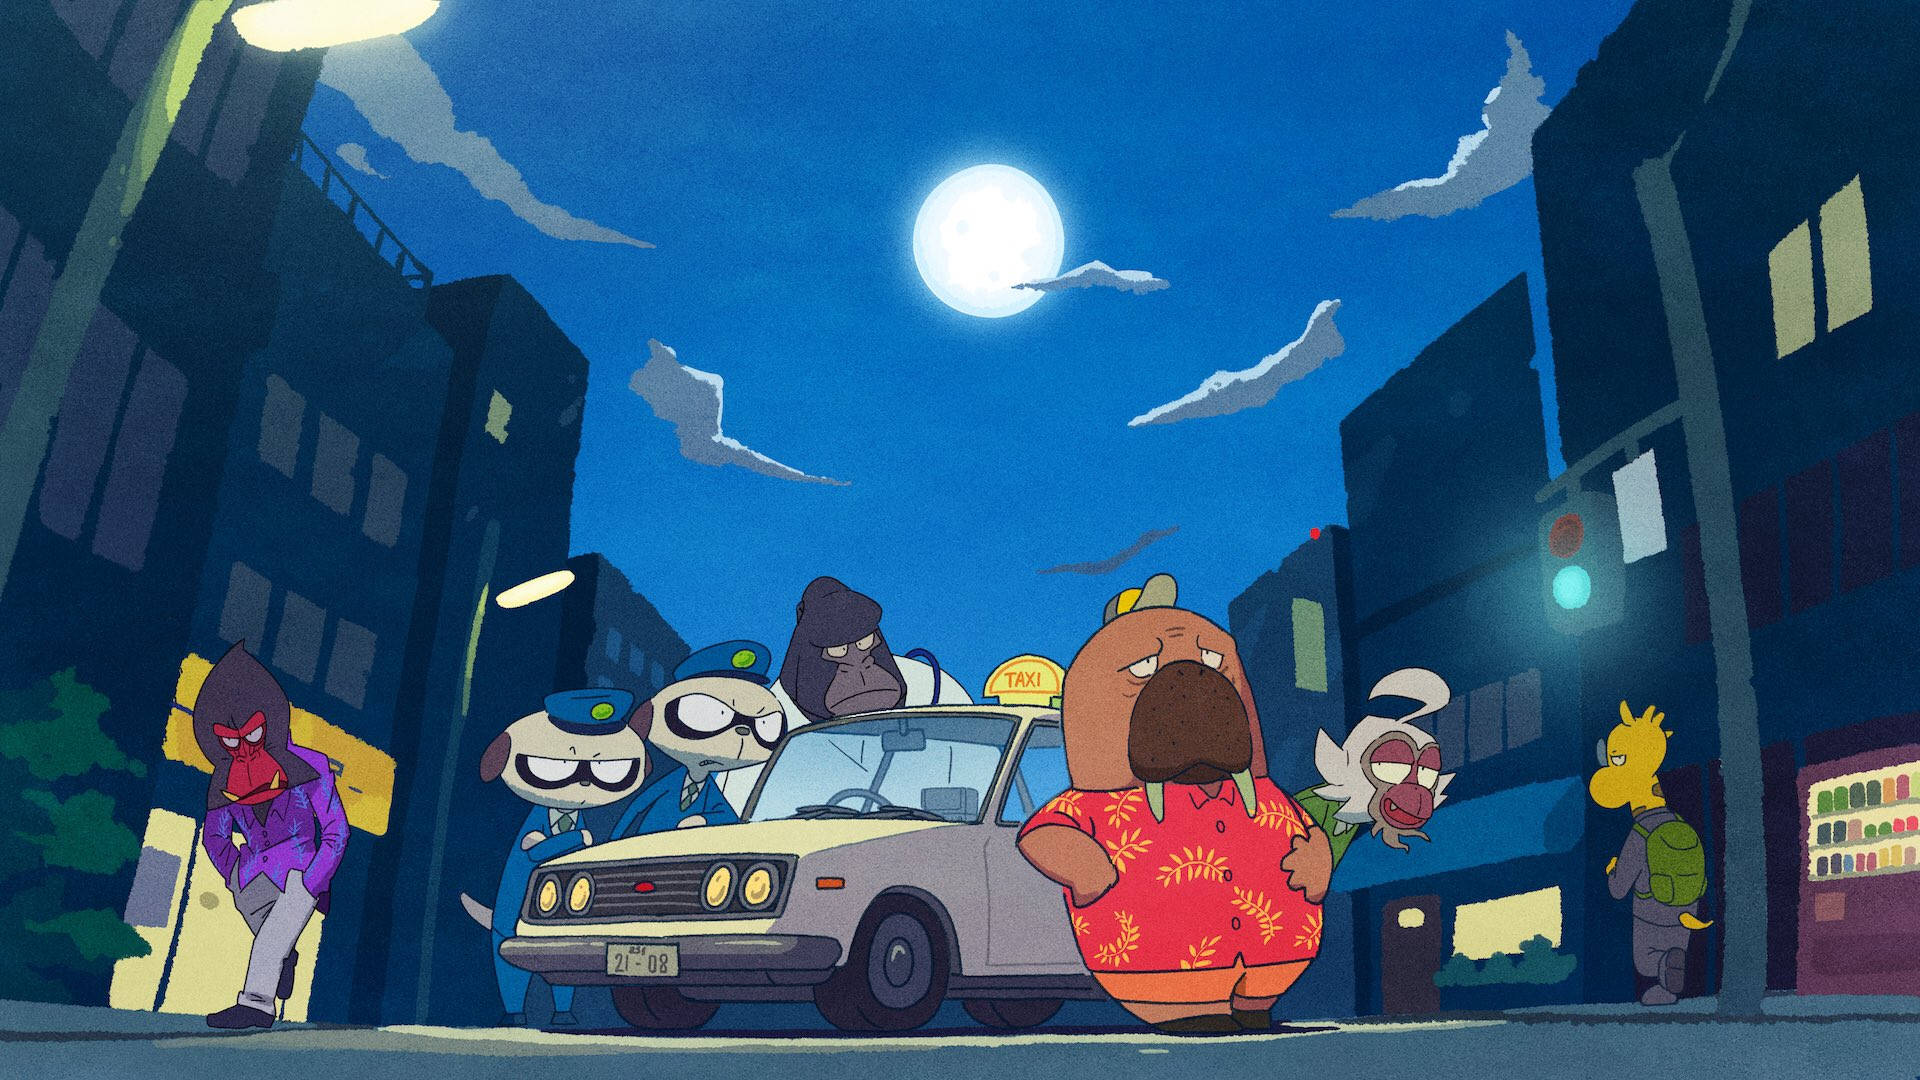 Odd Taxi Characters At Night